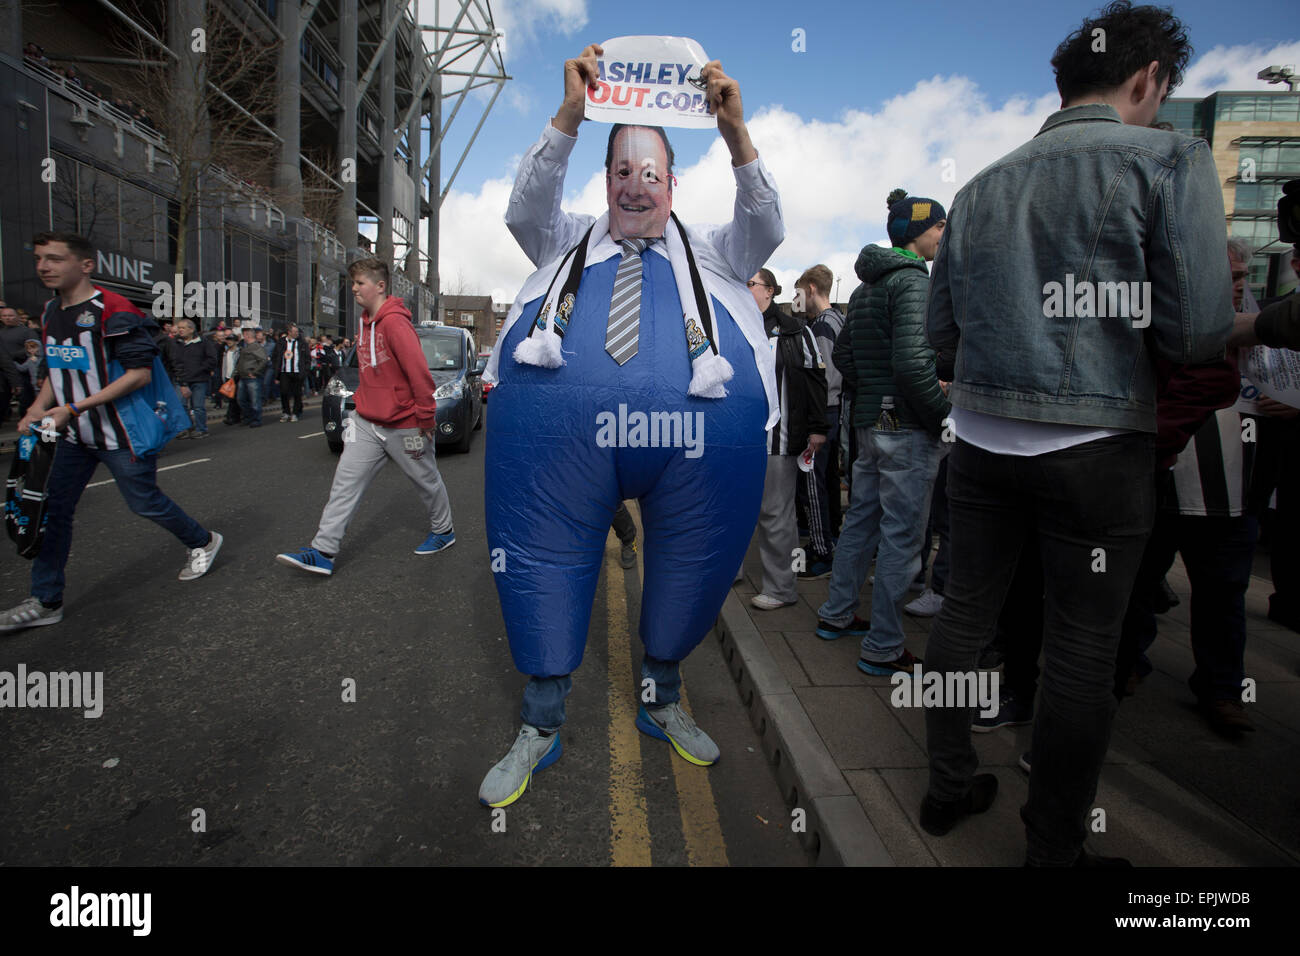 A man dressed to look like club owner Mike Ashley at a demonstration at the Gallowgate end of the stadium before Newcastle United host Tottenham Hotspurs in an English Premier League match at St. James' Park. The match was boycotted by a section of the home support critical of the role of owner Mike Ashley and sponsorship by a payday loan company. The match was won by Spurs by 3-1, watched by 47,427, the lowest league gate of the season at the stadium. Stock Photo